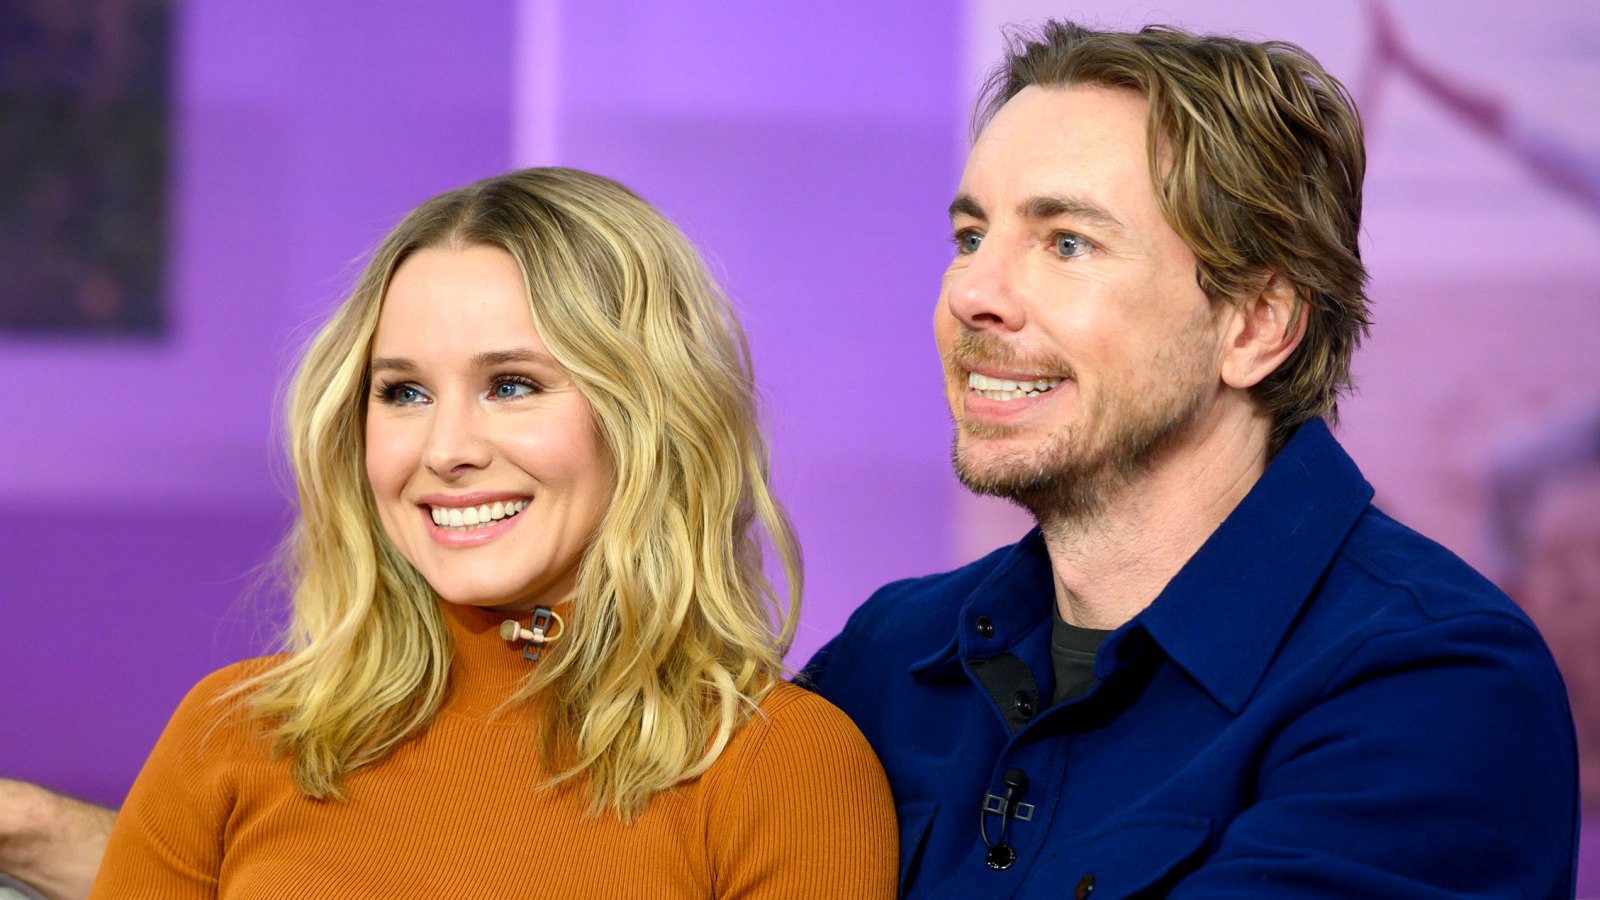 Dax Shepard: Kristen Bell and I Have Had ‘9 Date Nights in the Last 6 Years’